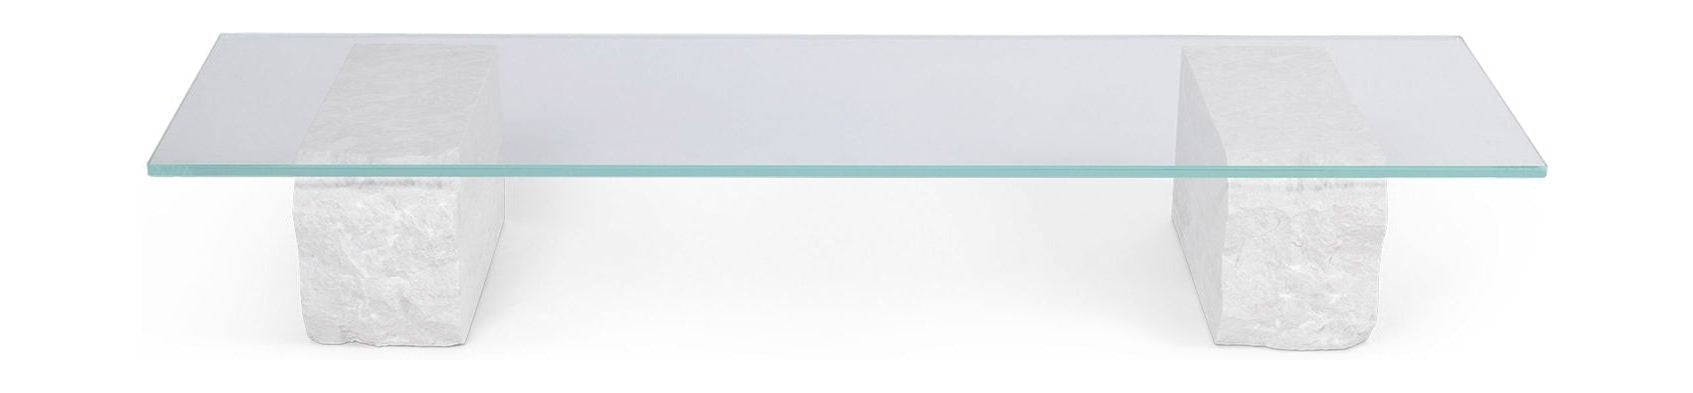 Ferm Living Mineral Display Table, Bianco Curia